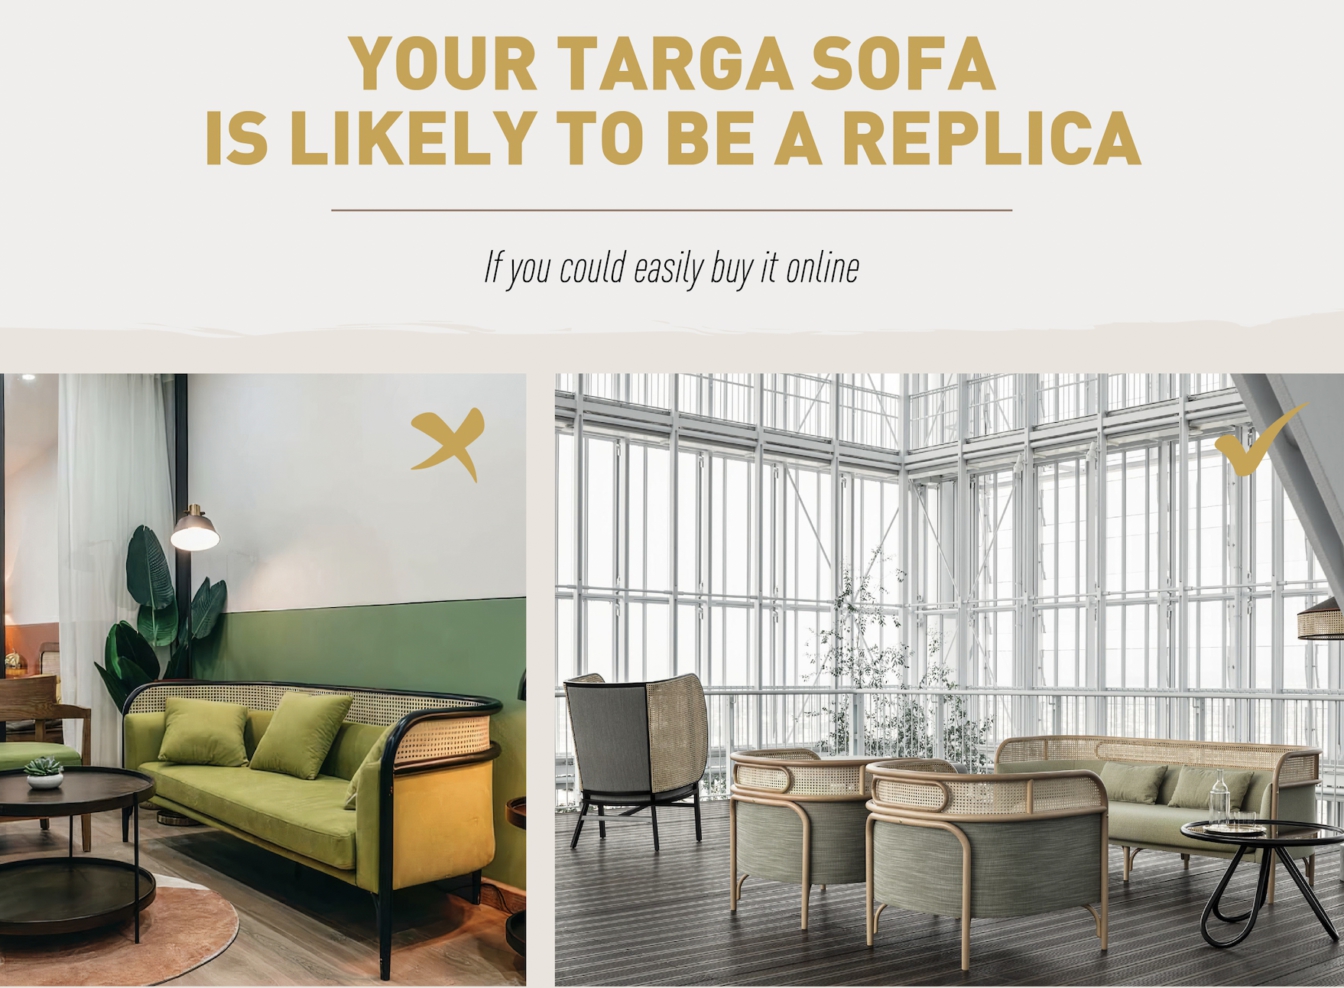 Your Targa sofa is likely to be a replica